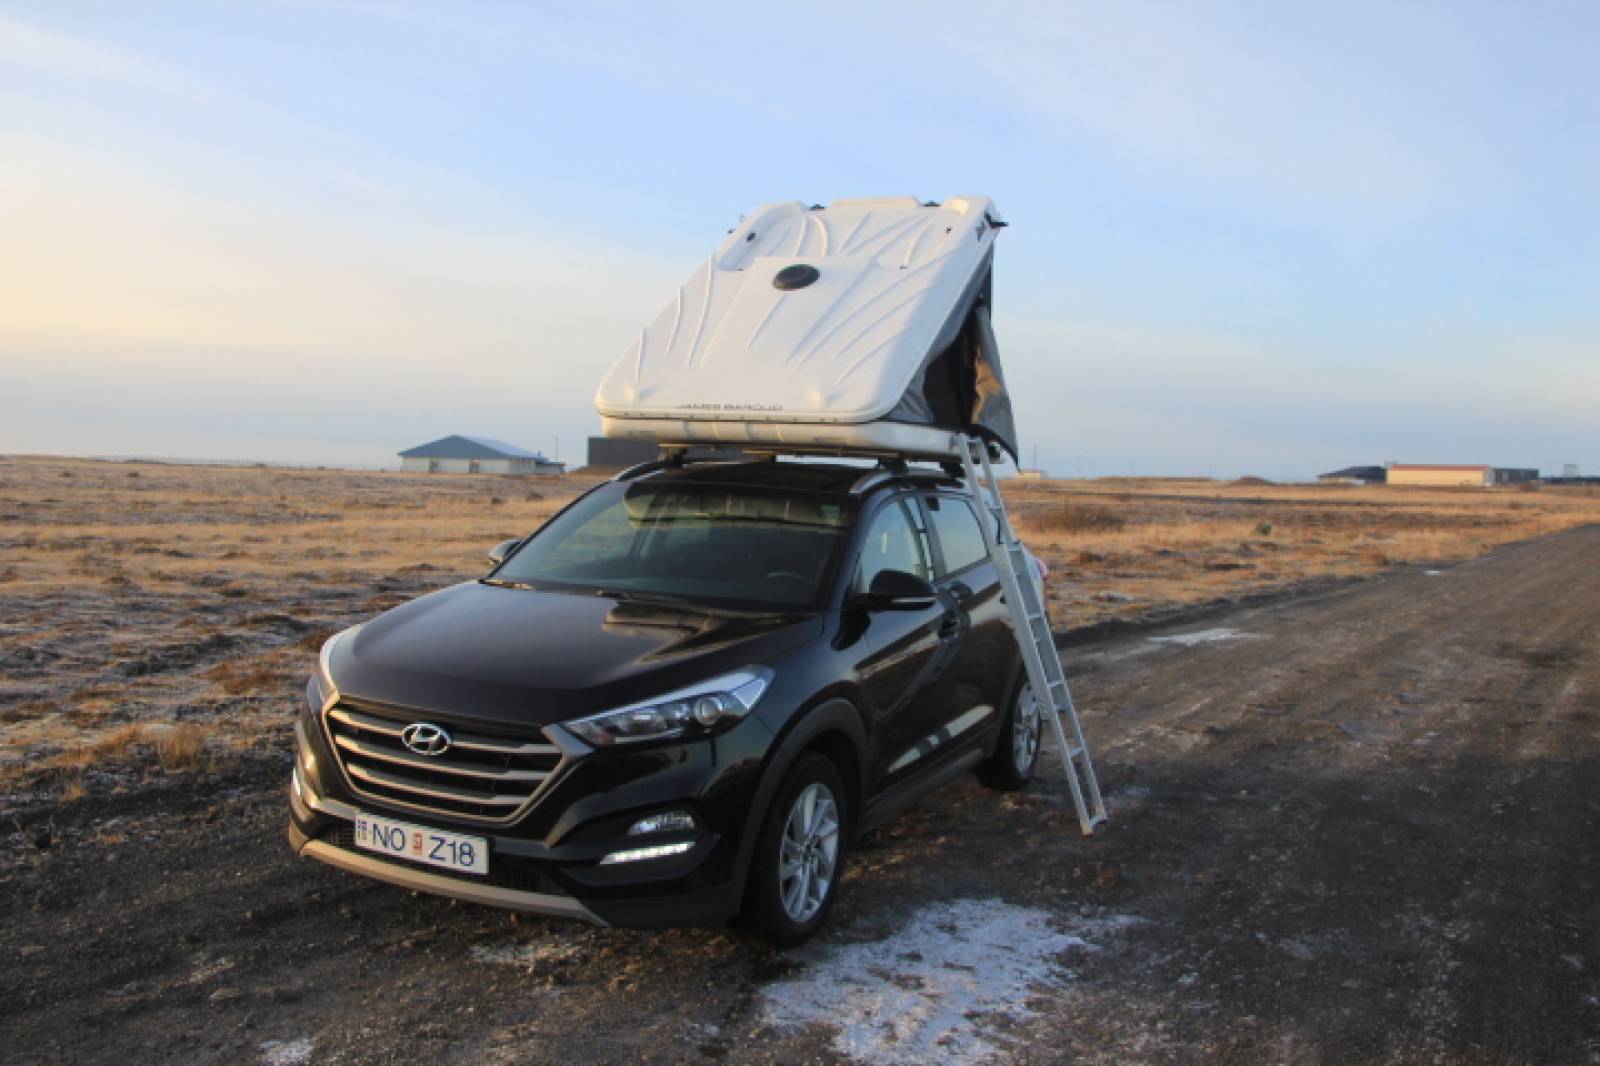 Tucson with roof Tent open with ladder